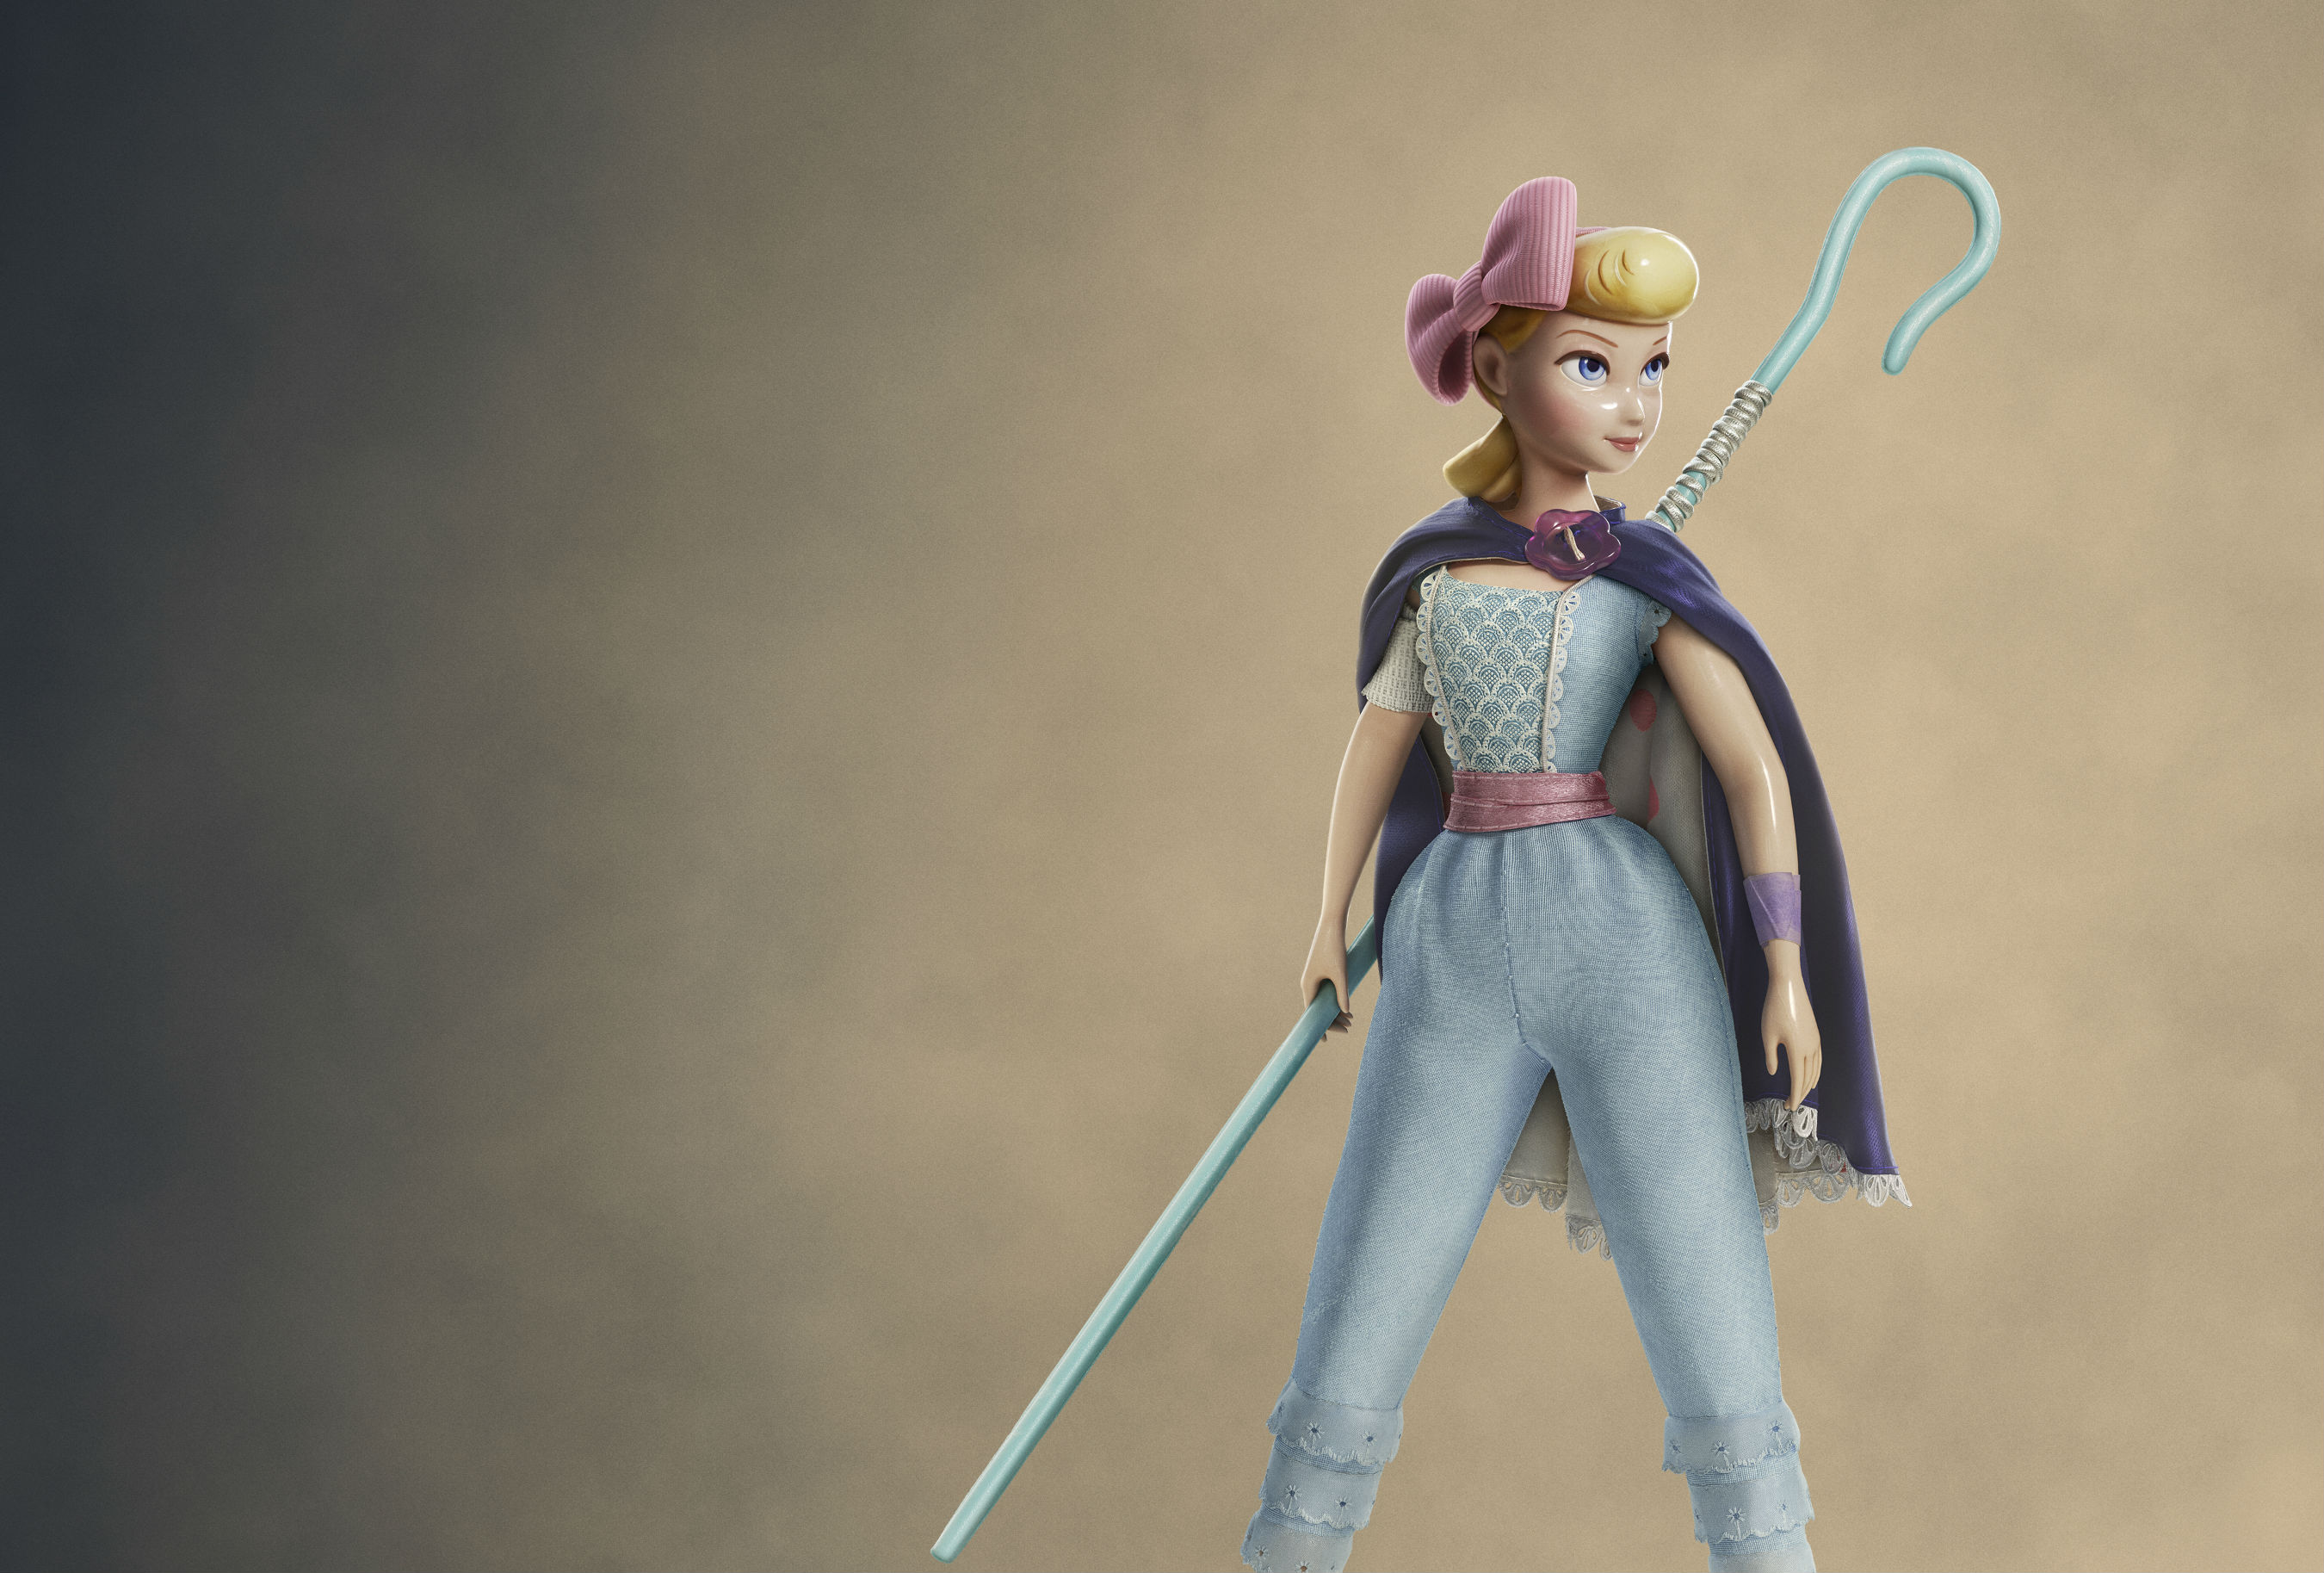 Toy Story 4: Bo Peep Is Back In New Teaser And Poster! New Synopsis Revealed!